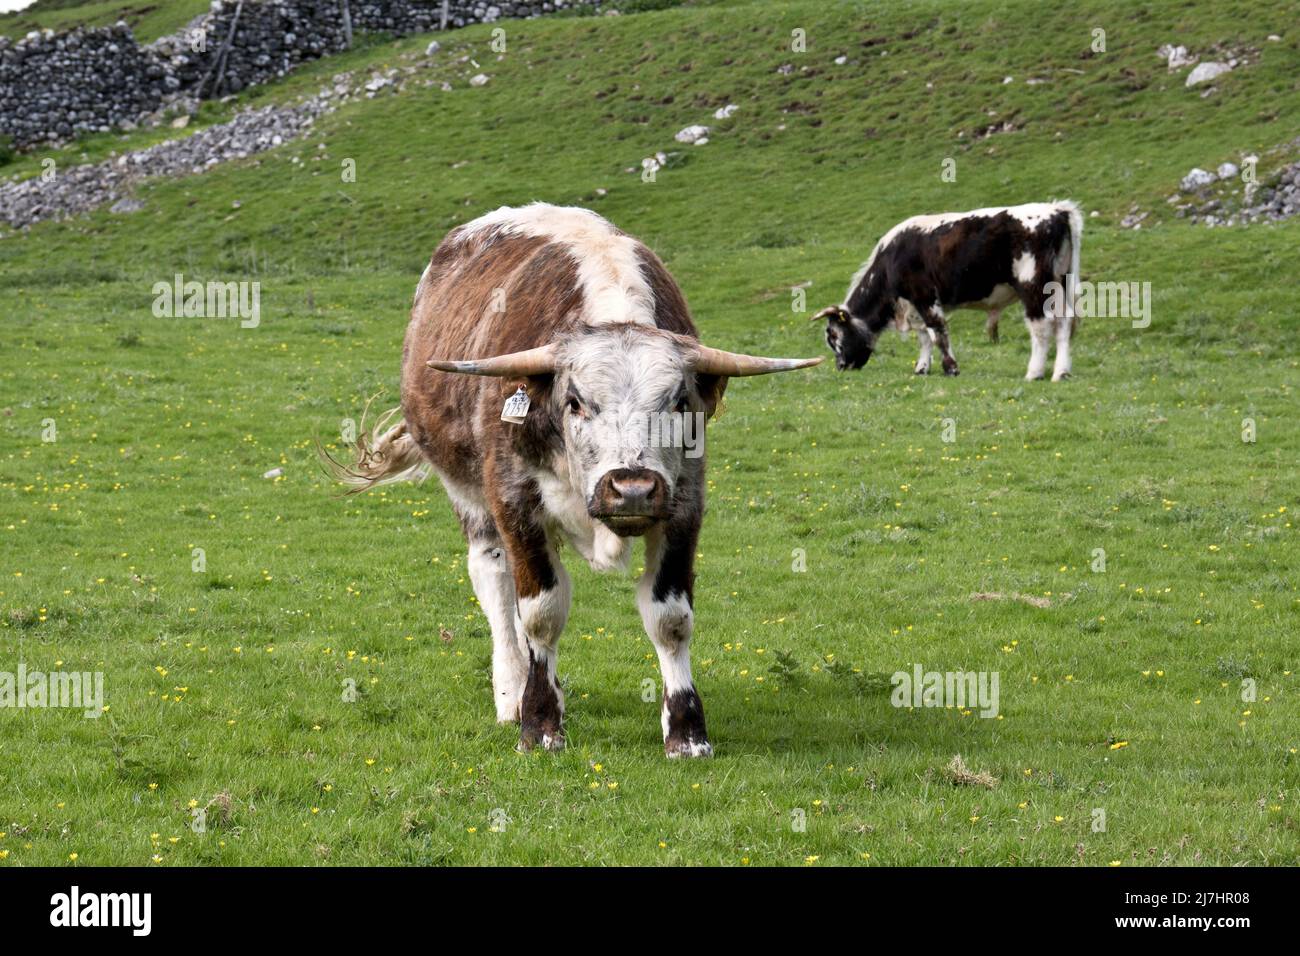 A Longhorn bullock, a traditional breed of cattle, grazing at Grassington in the Yorkshire Dales National Park, UK Stock Photo